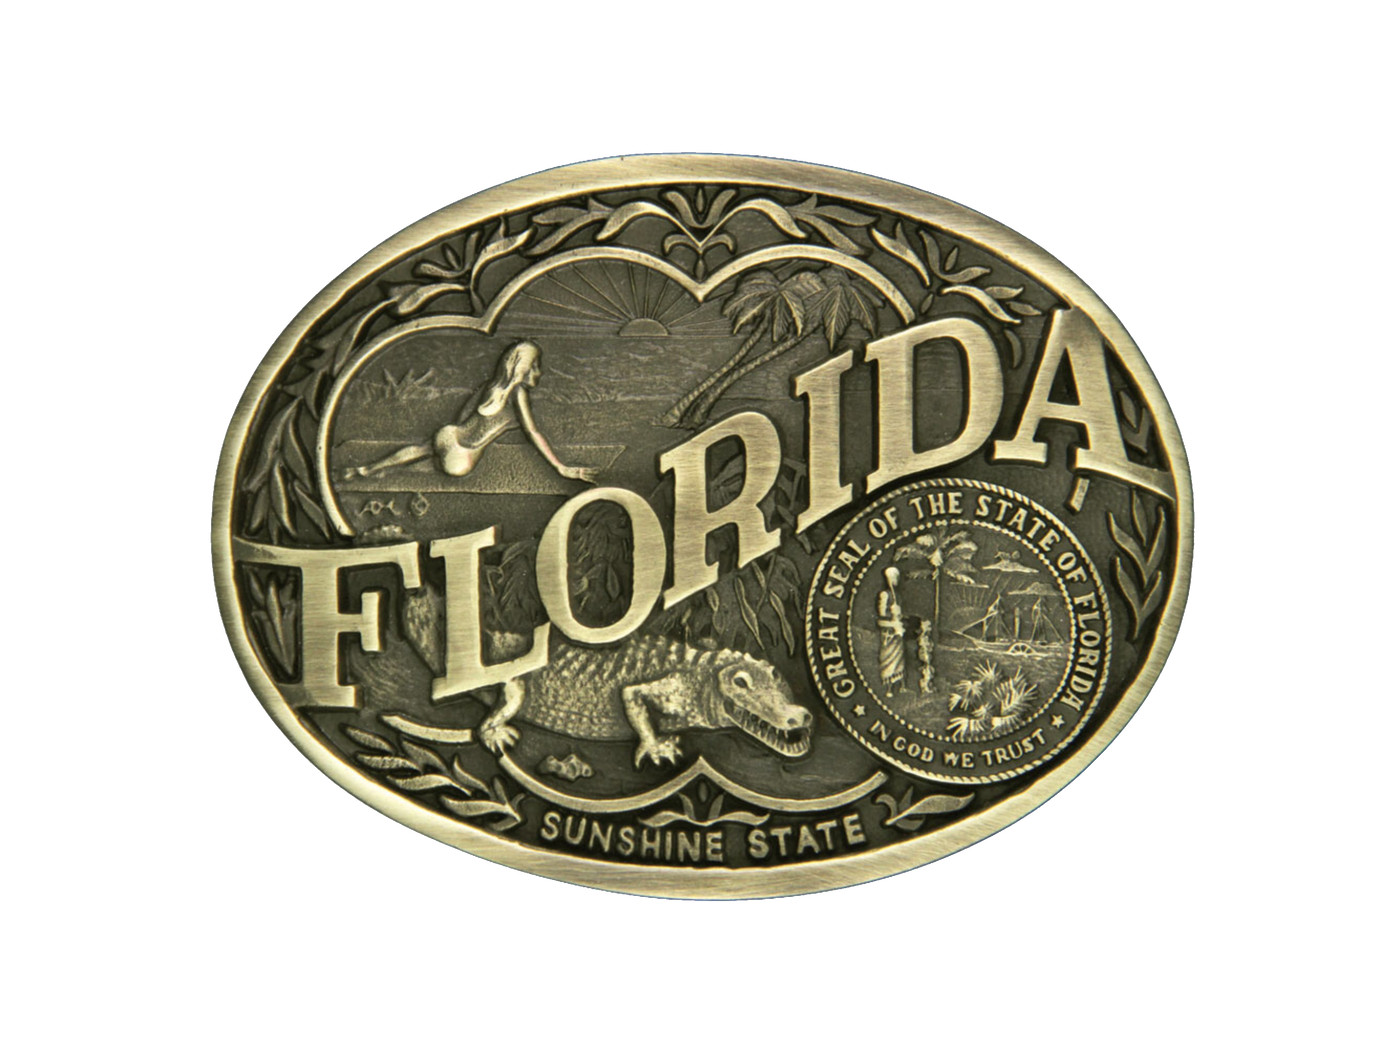 Antiqued brass colored Attitude buckle Florida state and symbols. Standard 1.5 belt swivel.